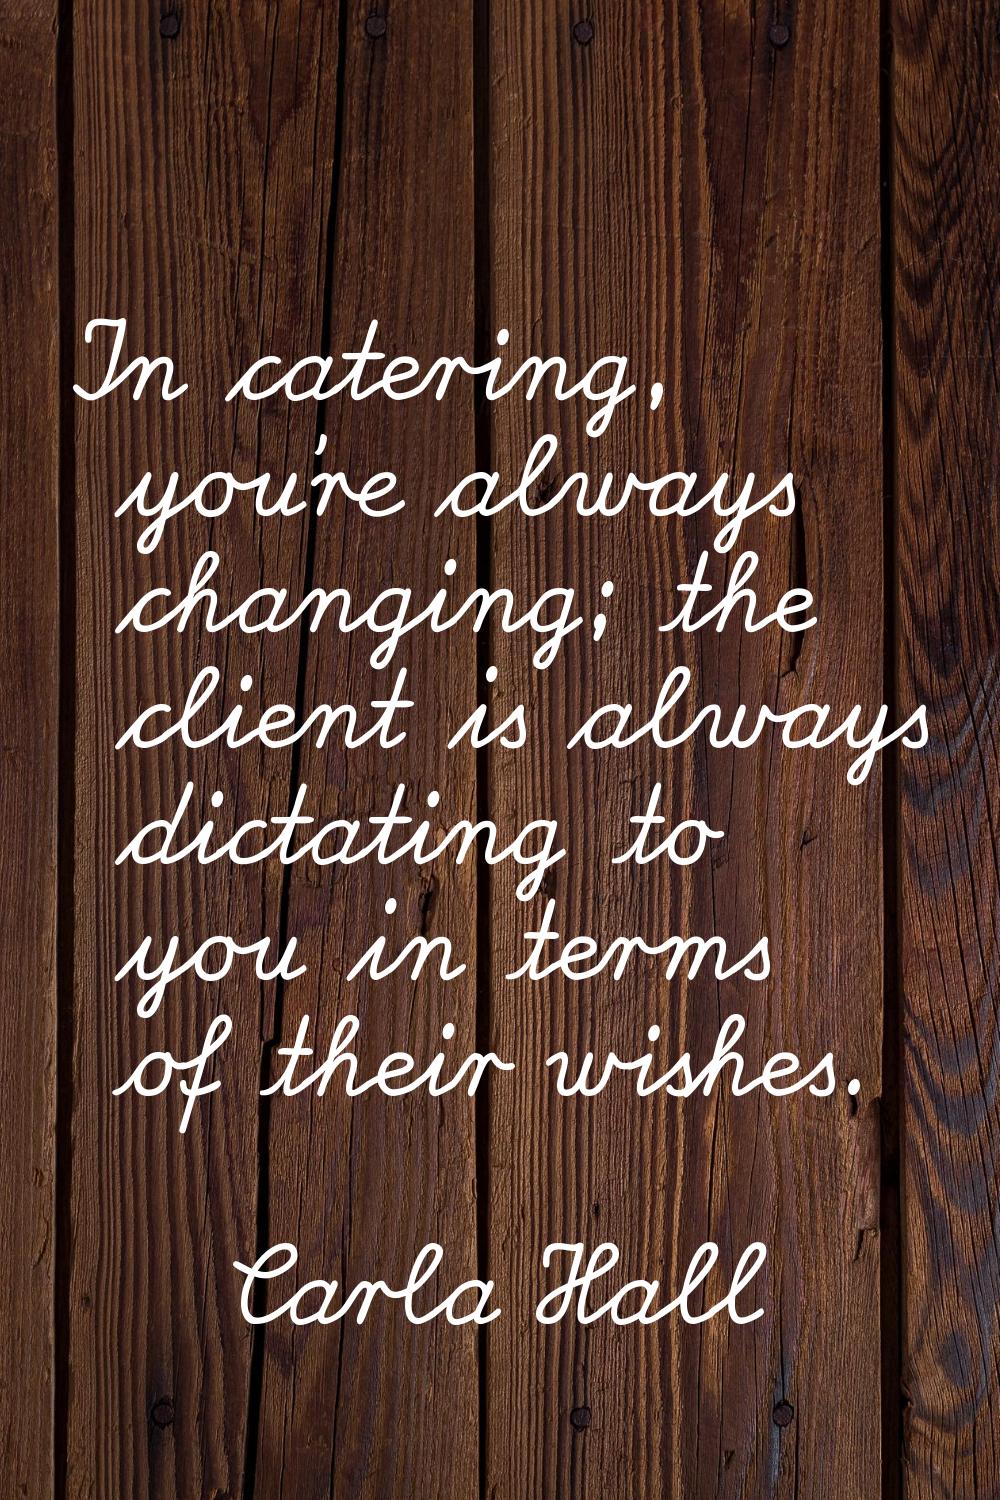 In catering, you're always changing; the client is always dictating to you in terms of their wishes